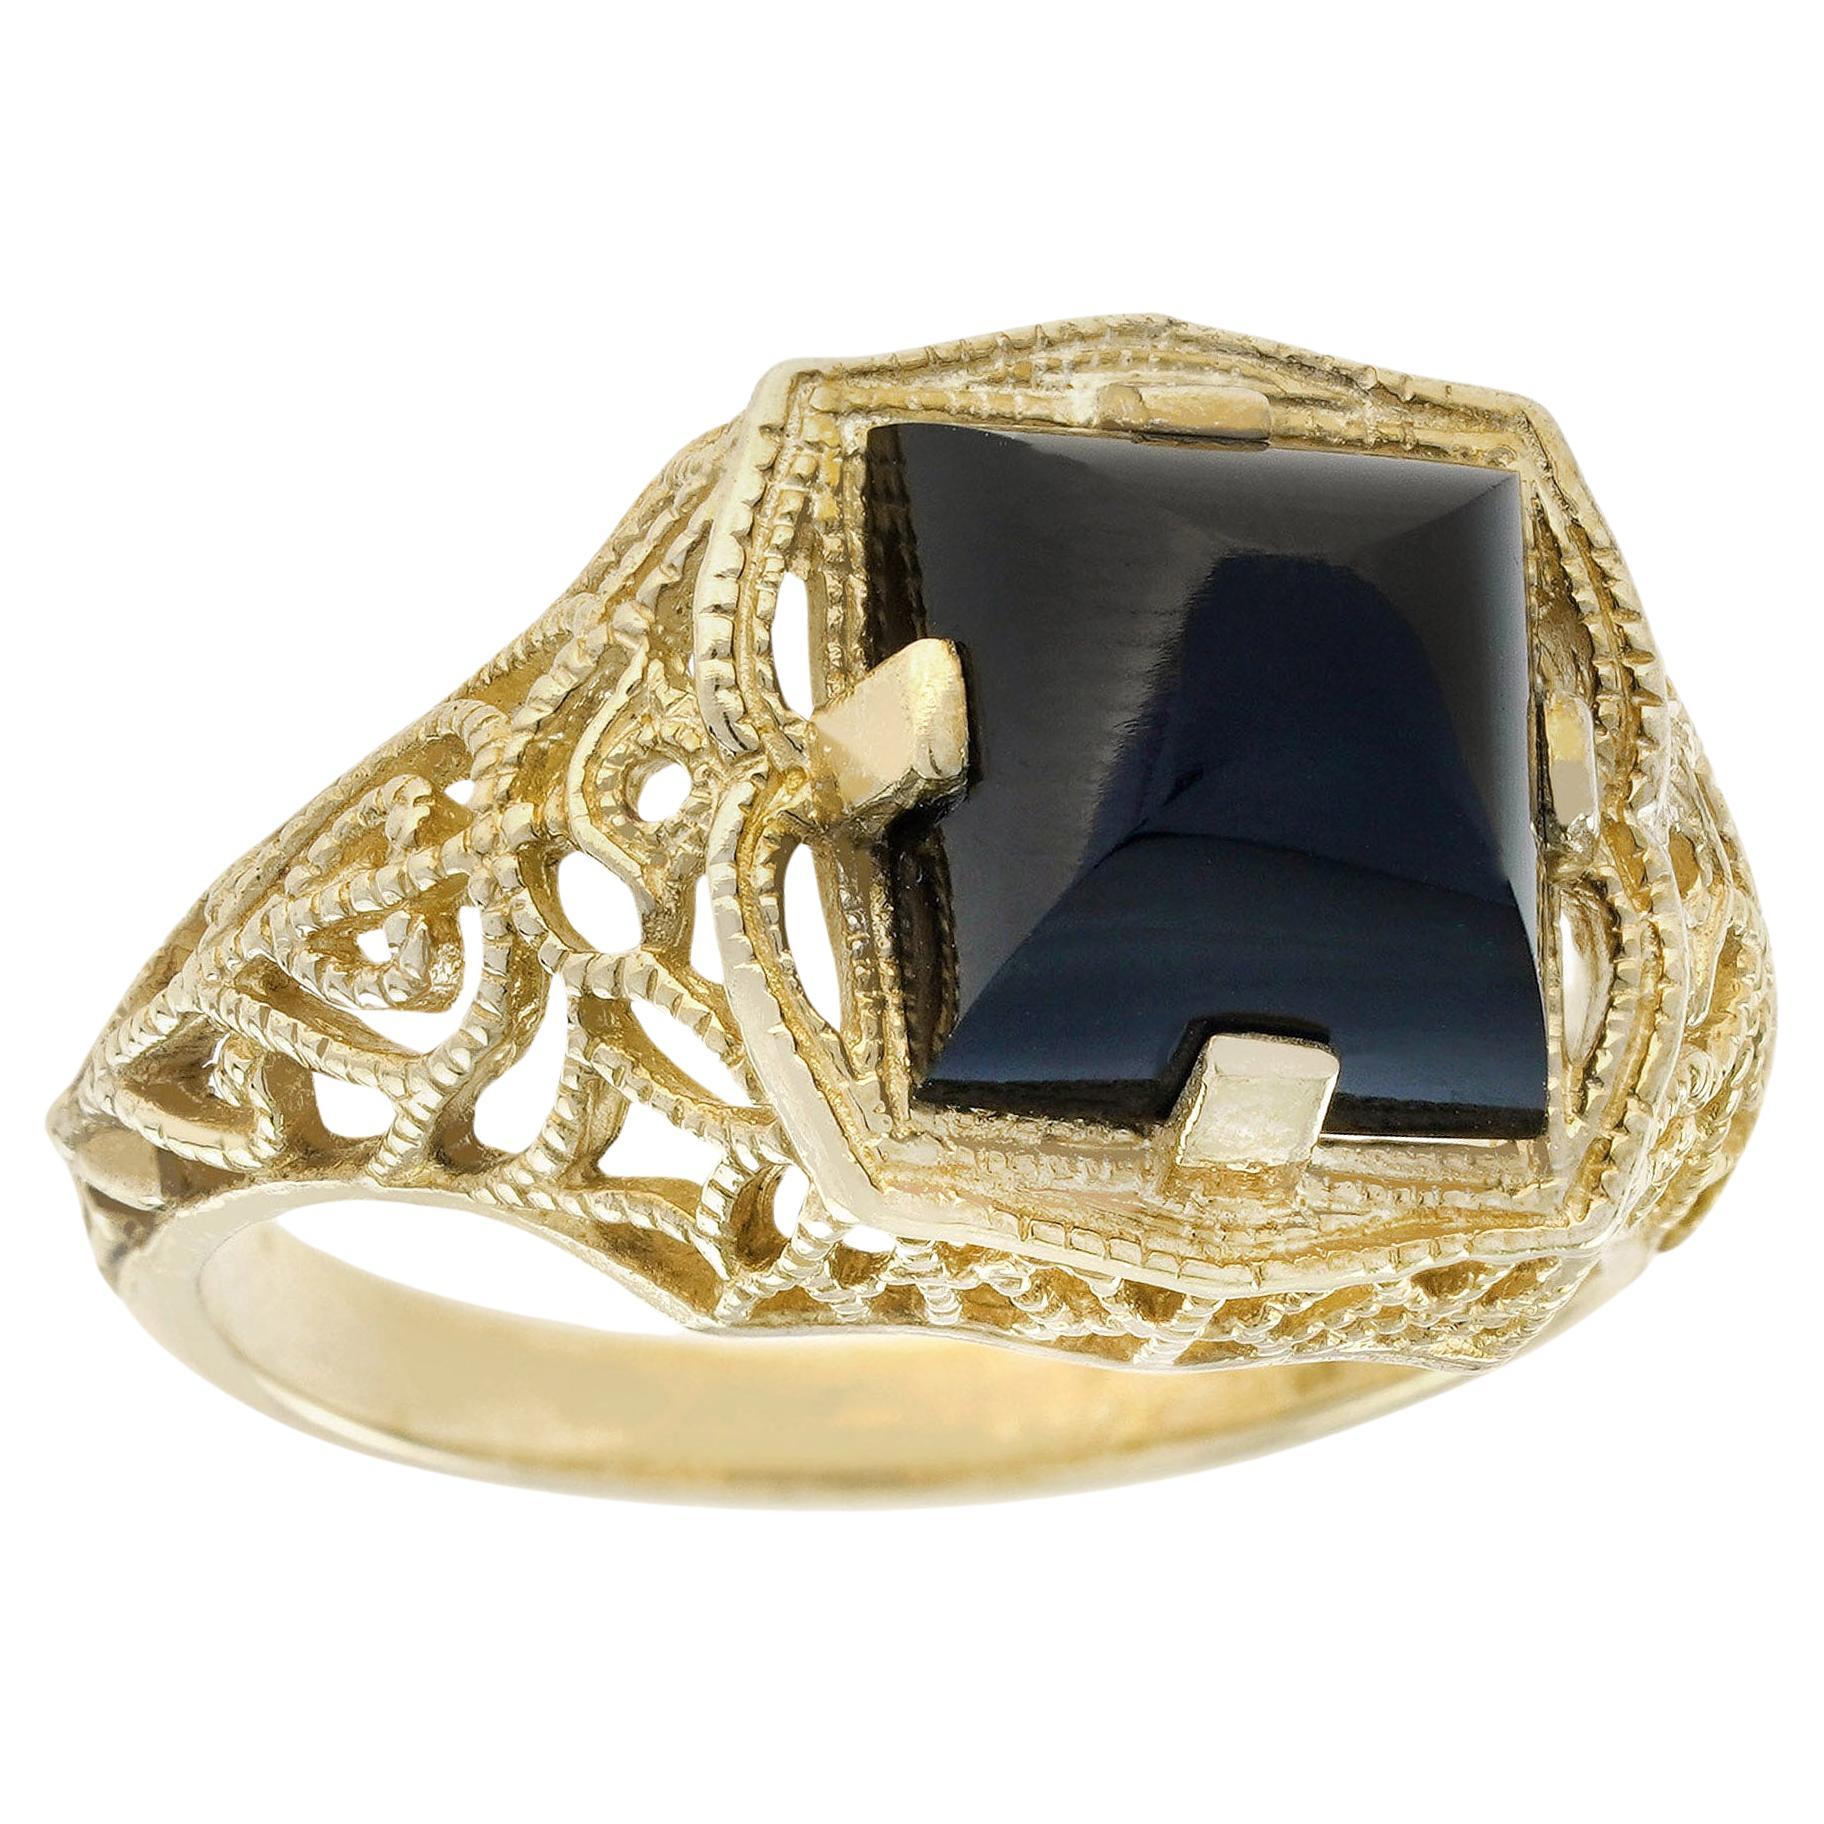 Natural Square Onyx Vintage Style Filigree Ring in Solid 9K Yellow Gold